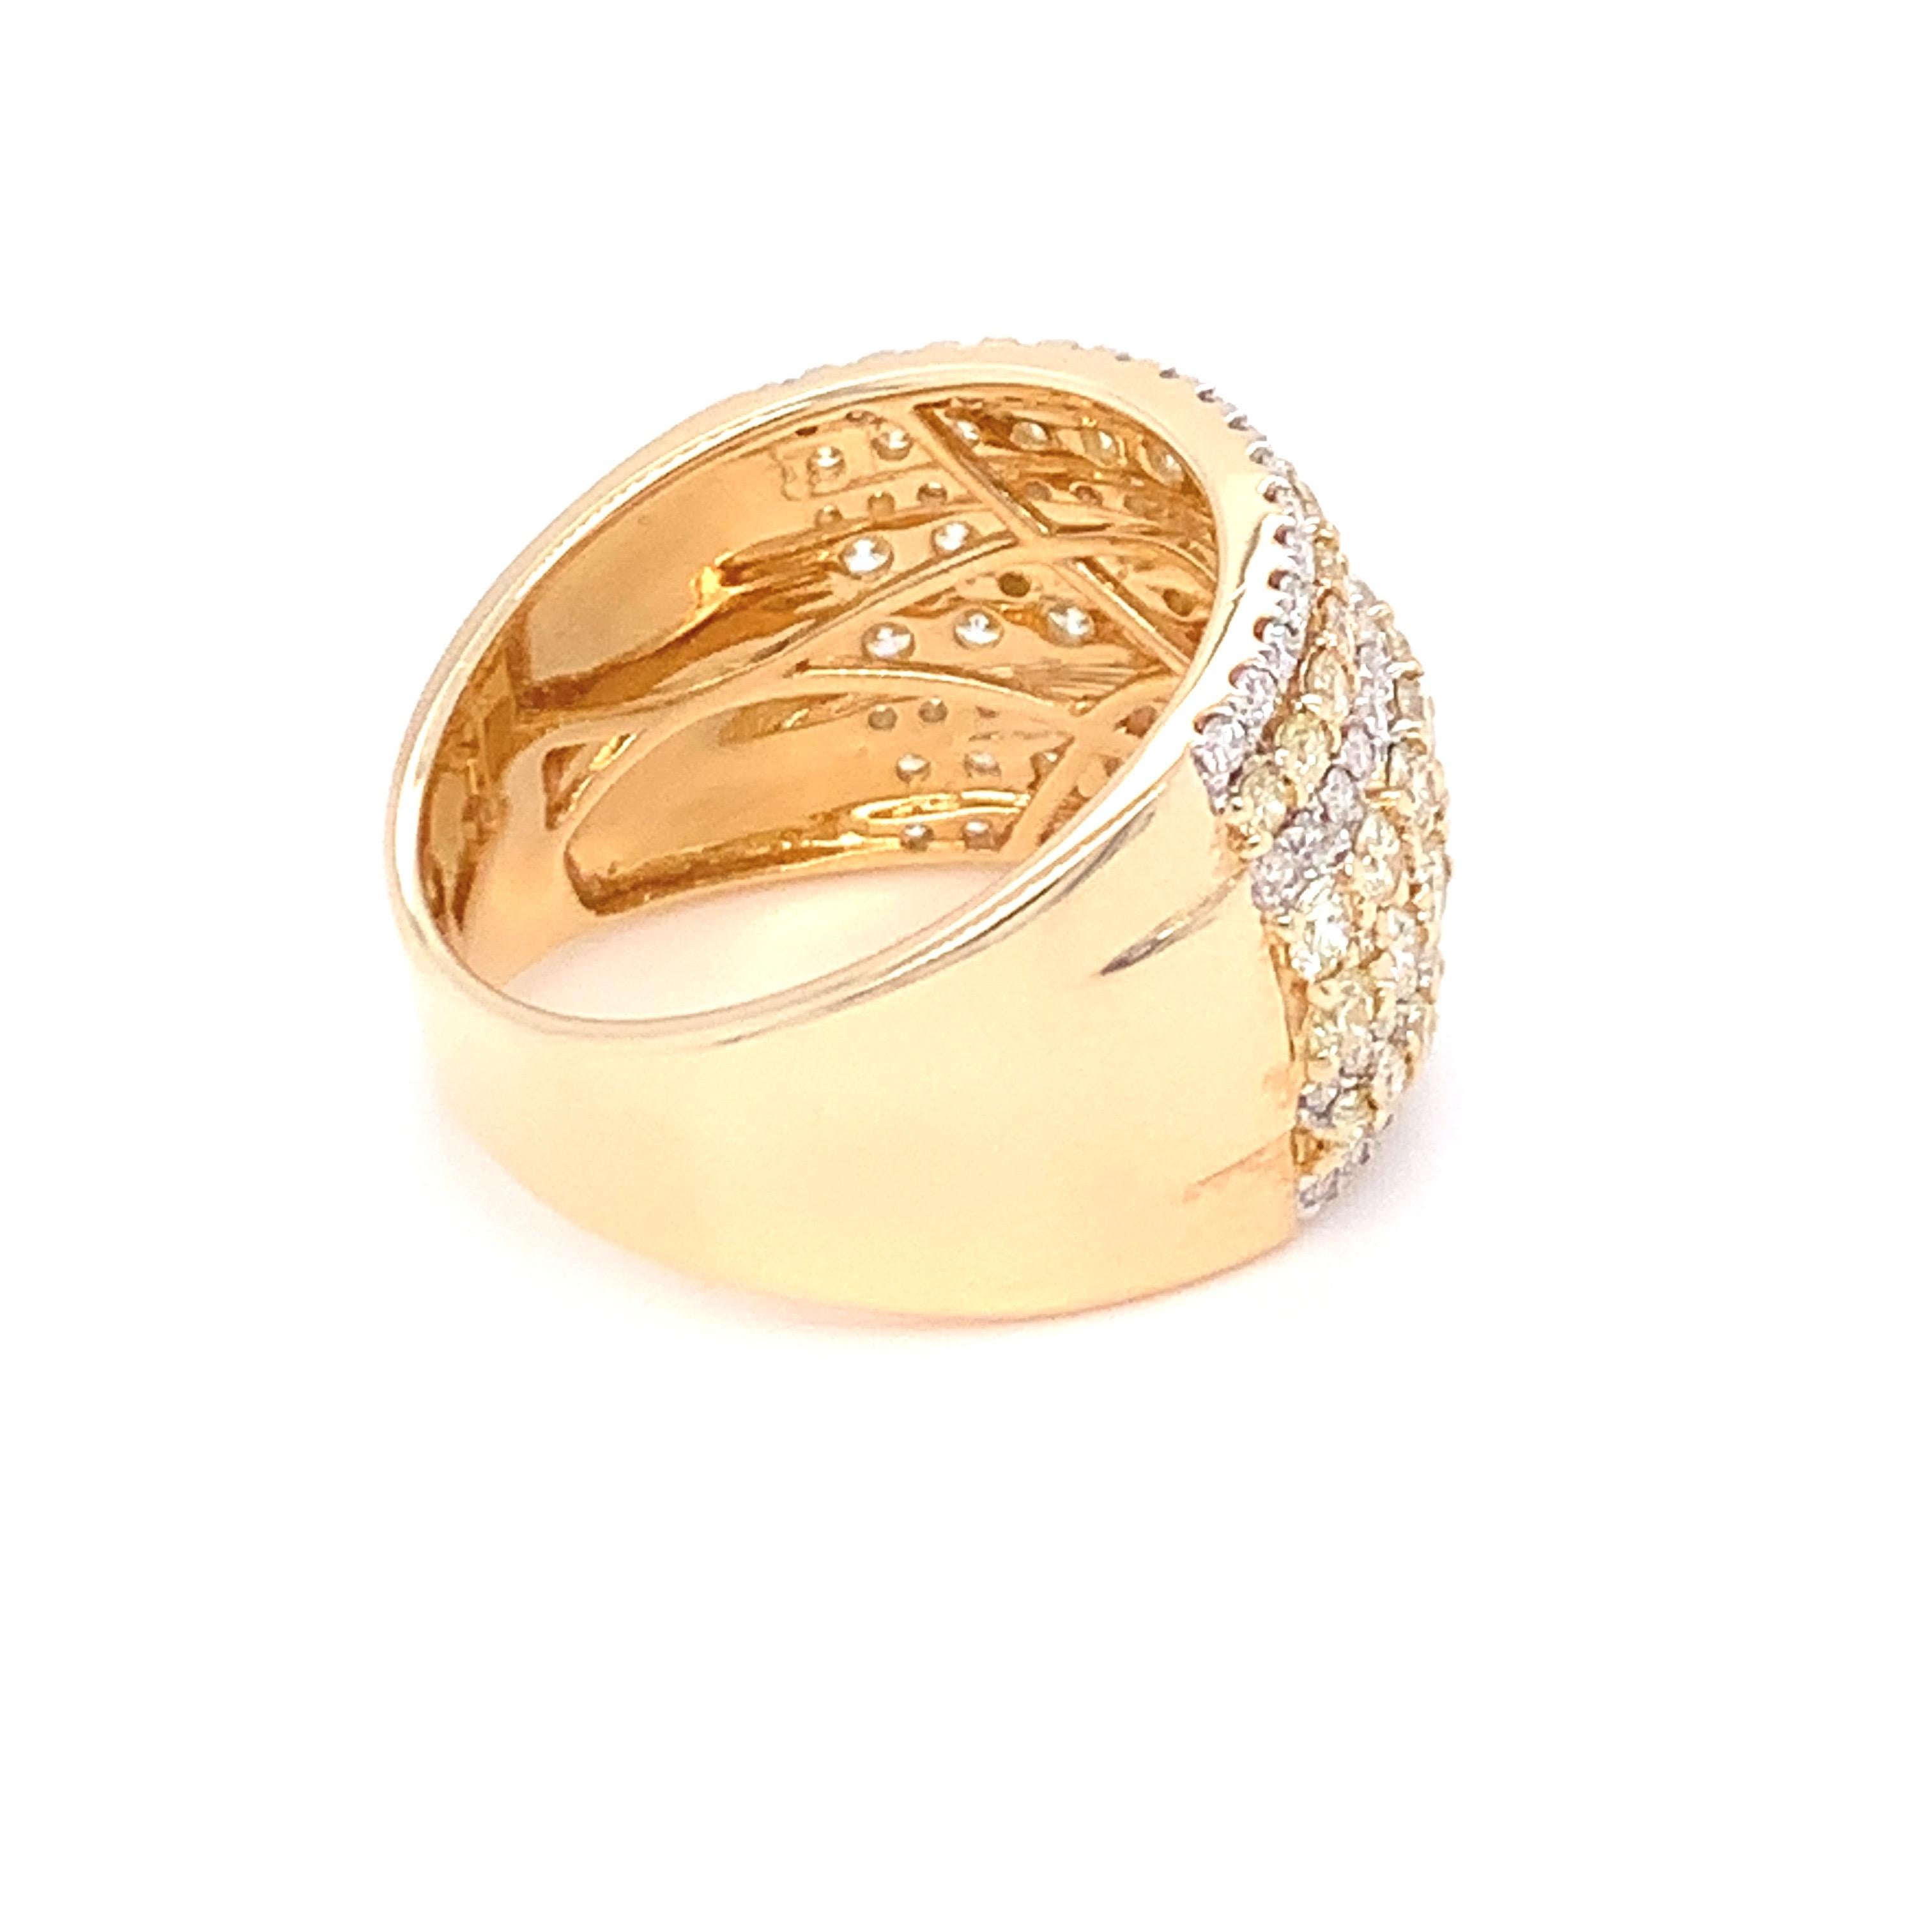 Brilliant Cut 2.08 Carat Diamond Band Ring in 14k Yellow Gold For Sale